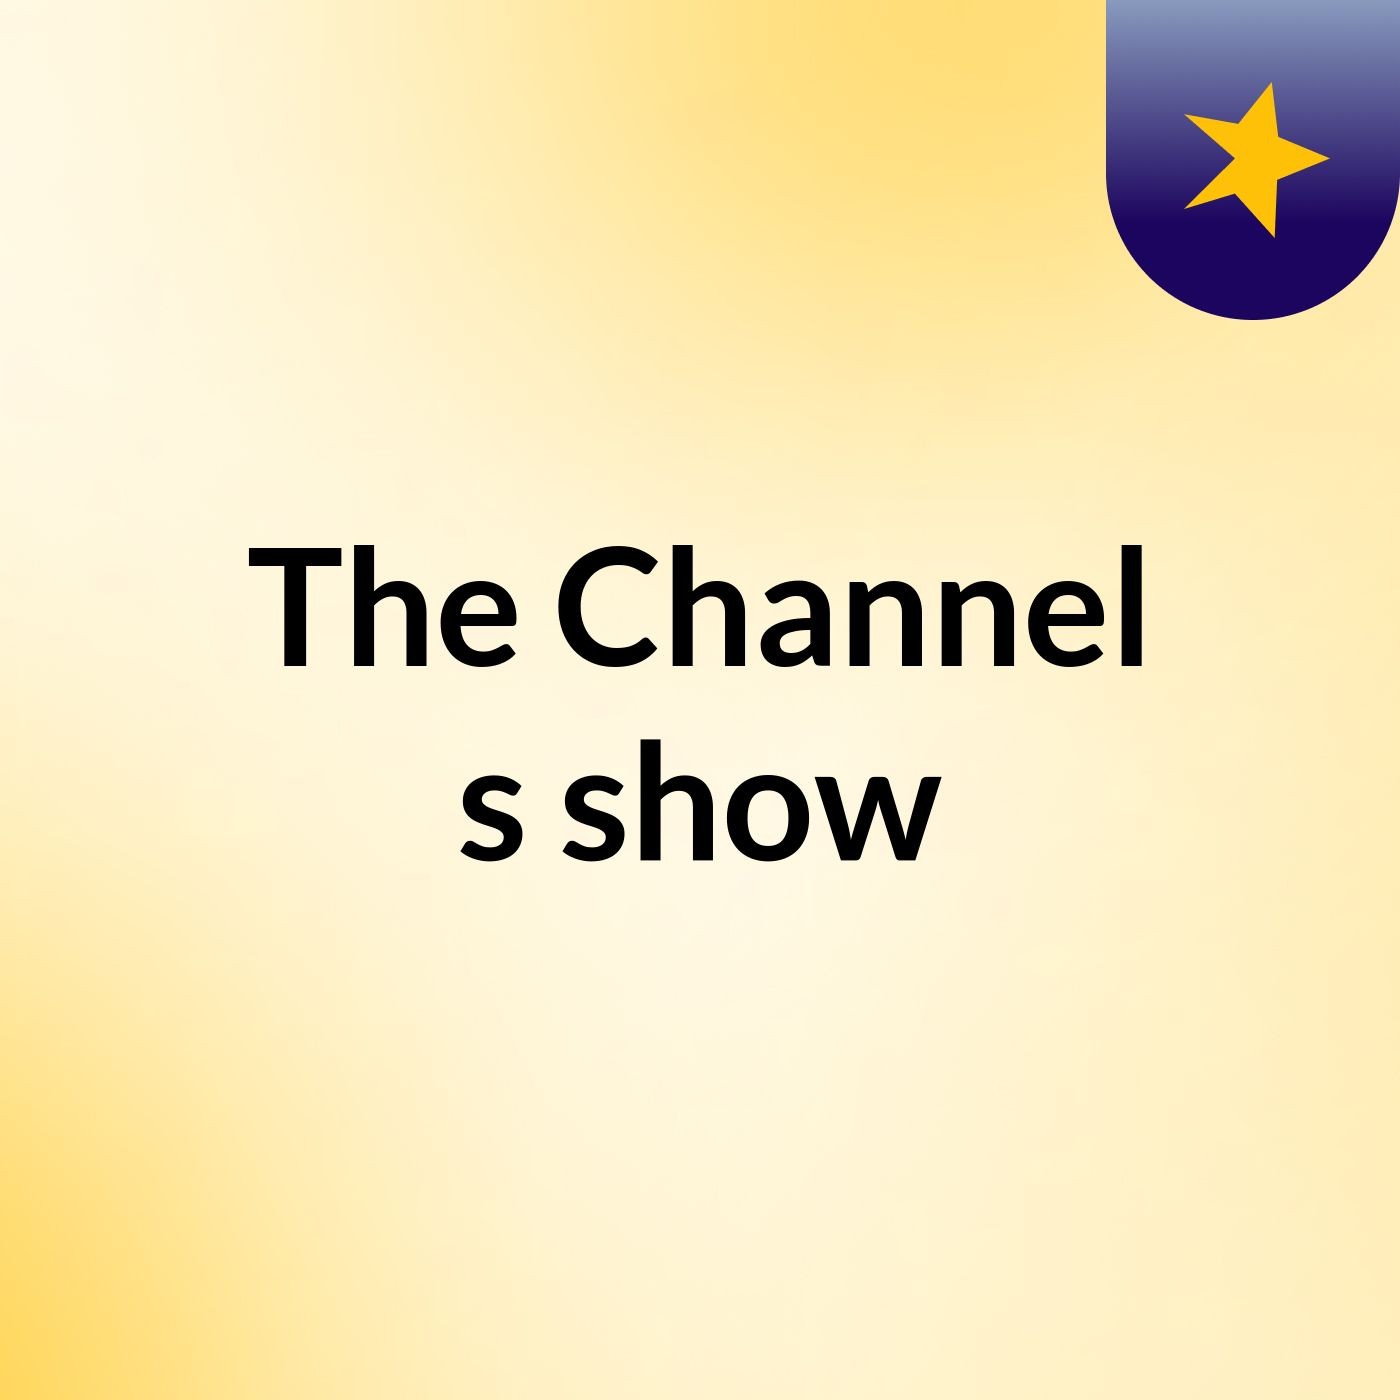 Episode 8 - The Channel's show